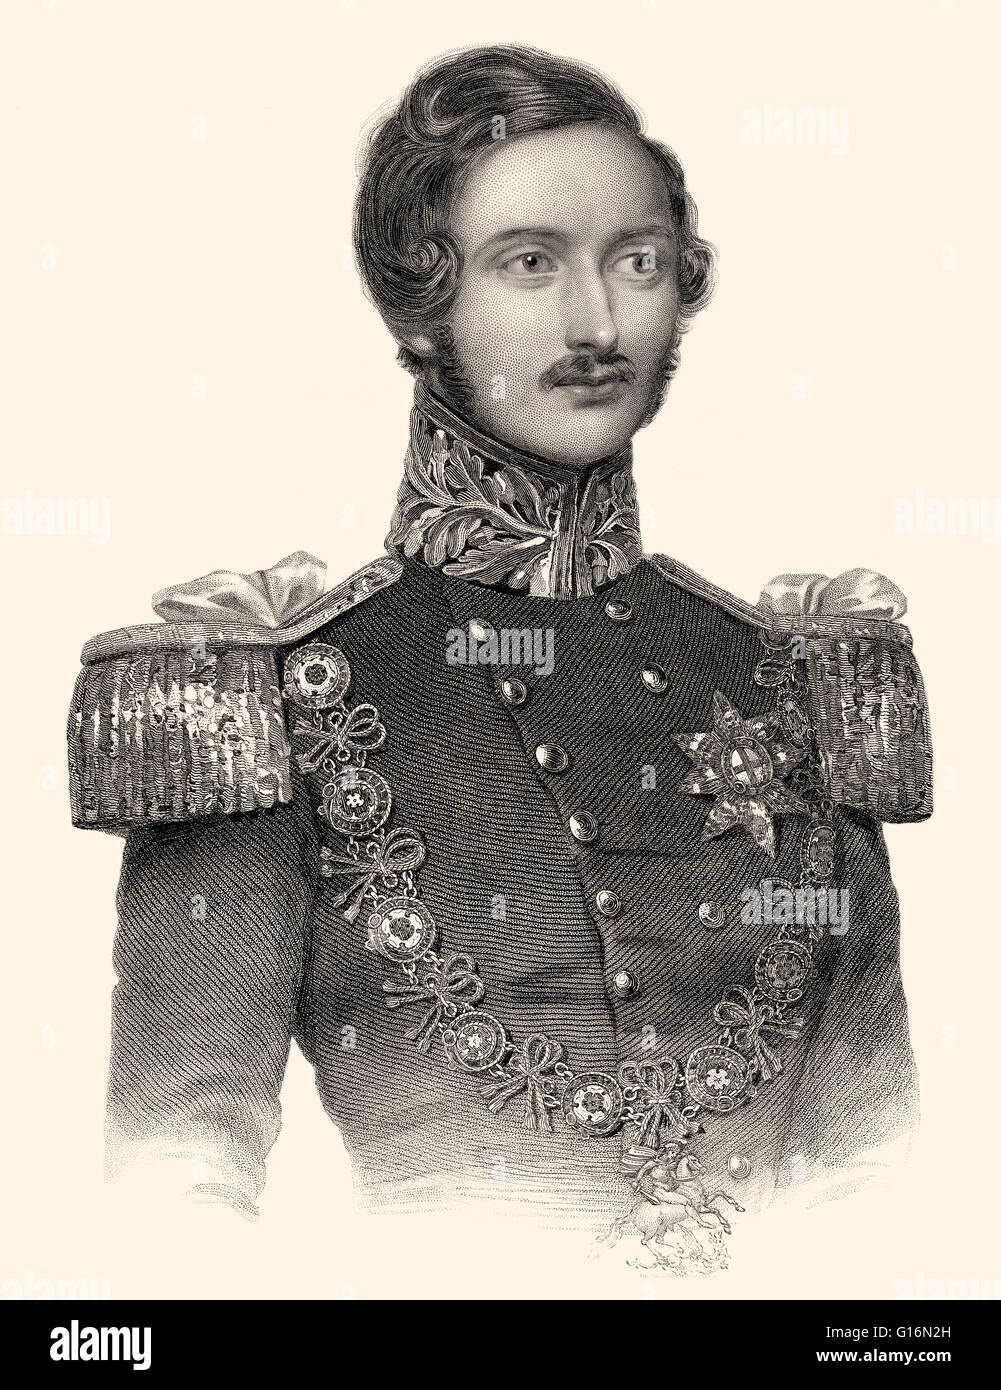 Prince Albert of Saxe-Coburg and Gotha, later the Prince Consort, 1819-1861 Stock Photo